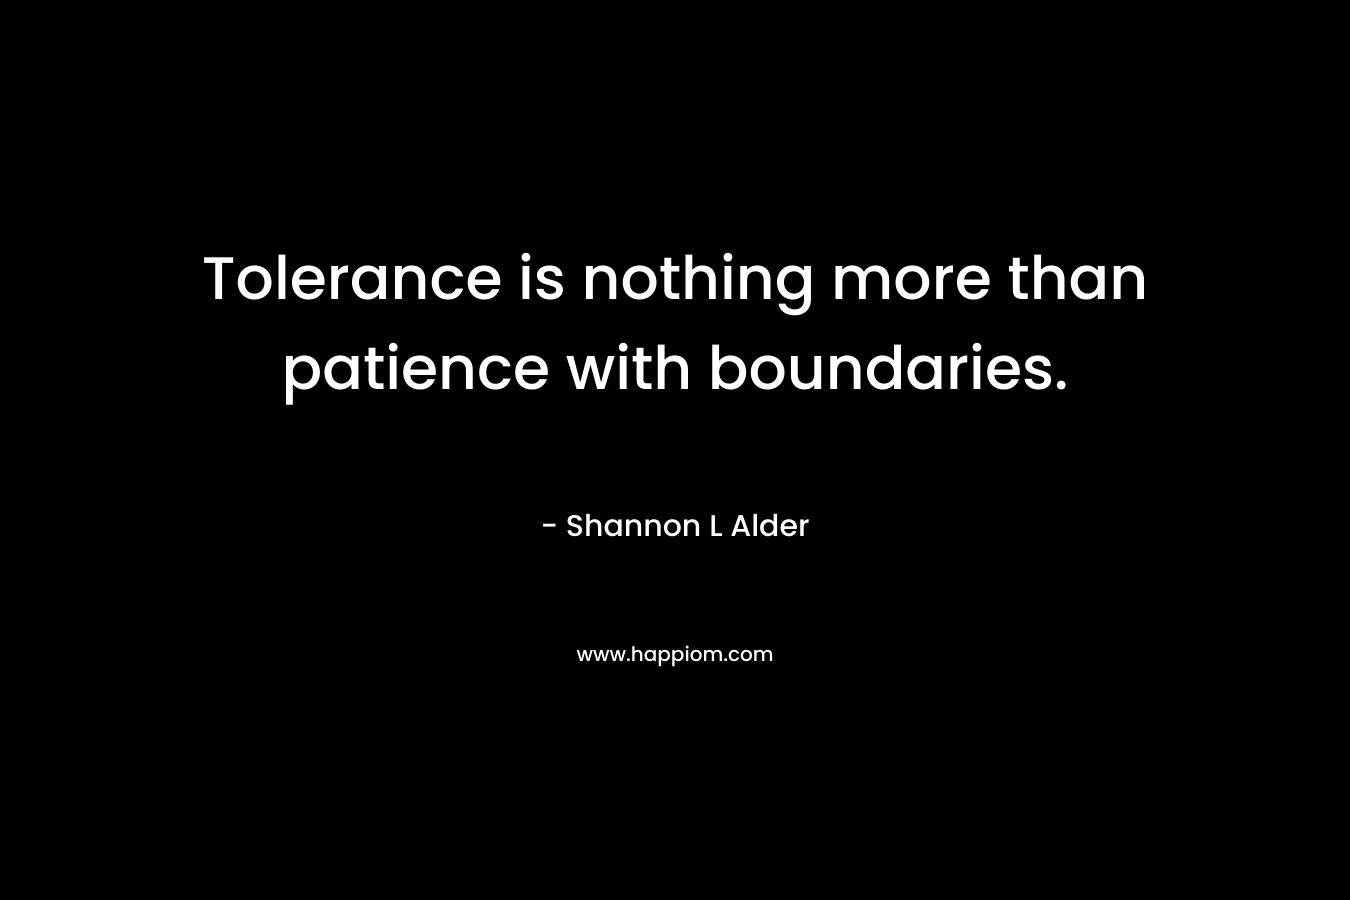 Tolerance is nothing more than patience with boundaries. – Shannon L Alder